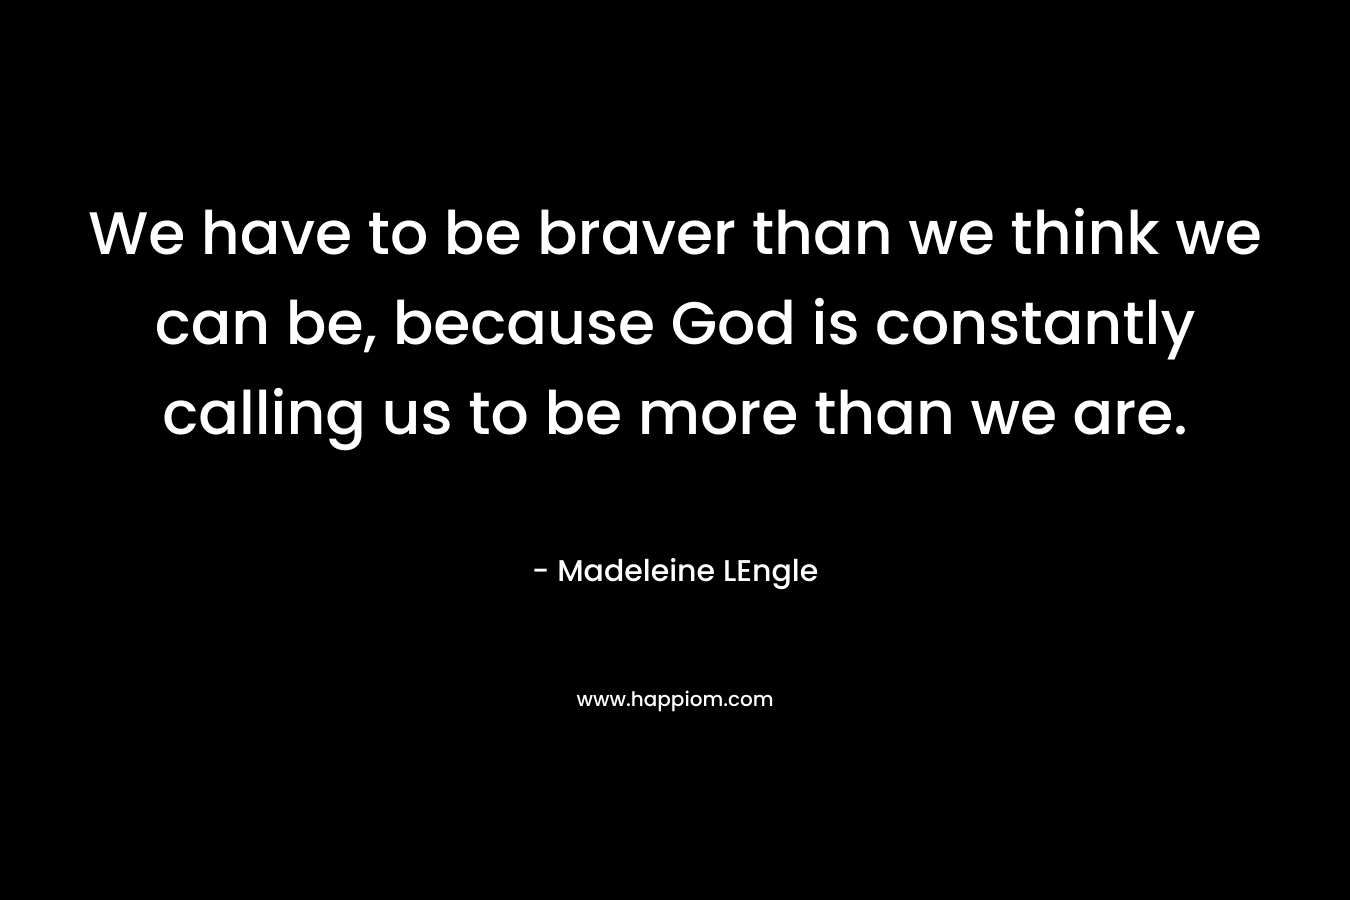 We have to be braver than we think we can be, because God is constantly calling us to be more than we are.